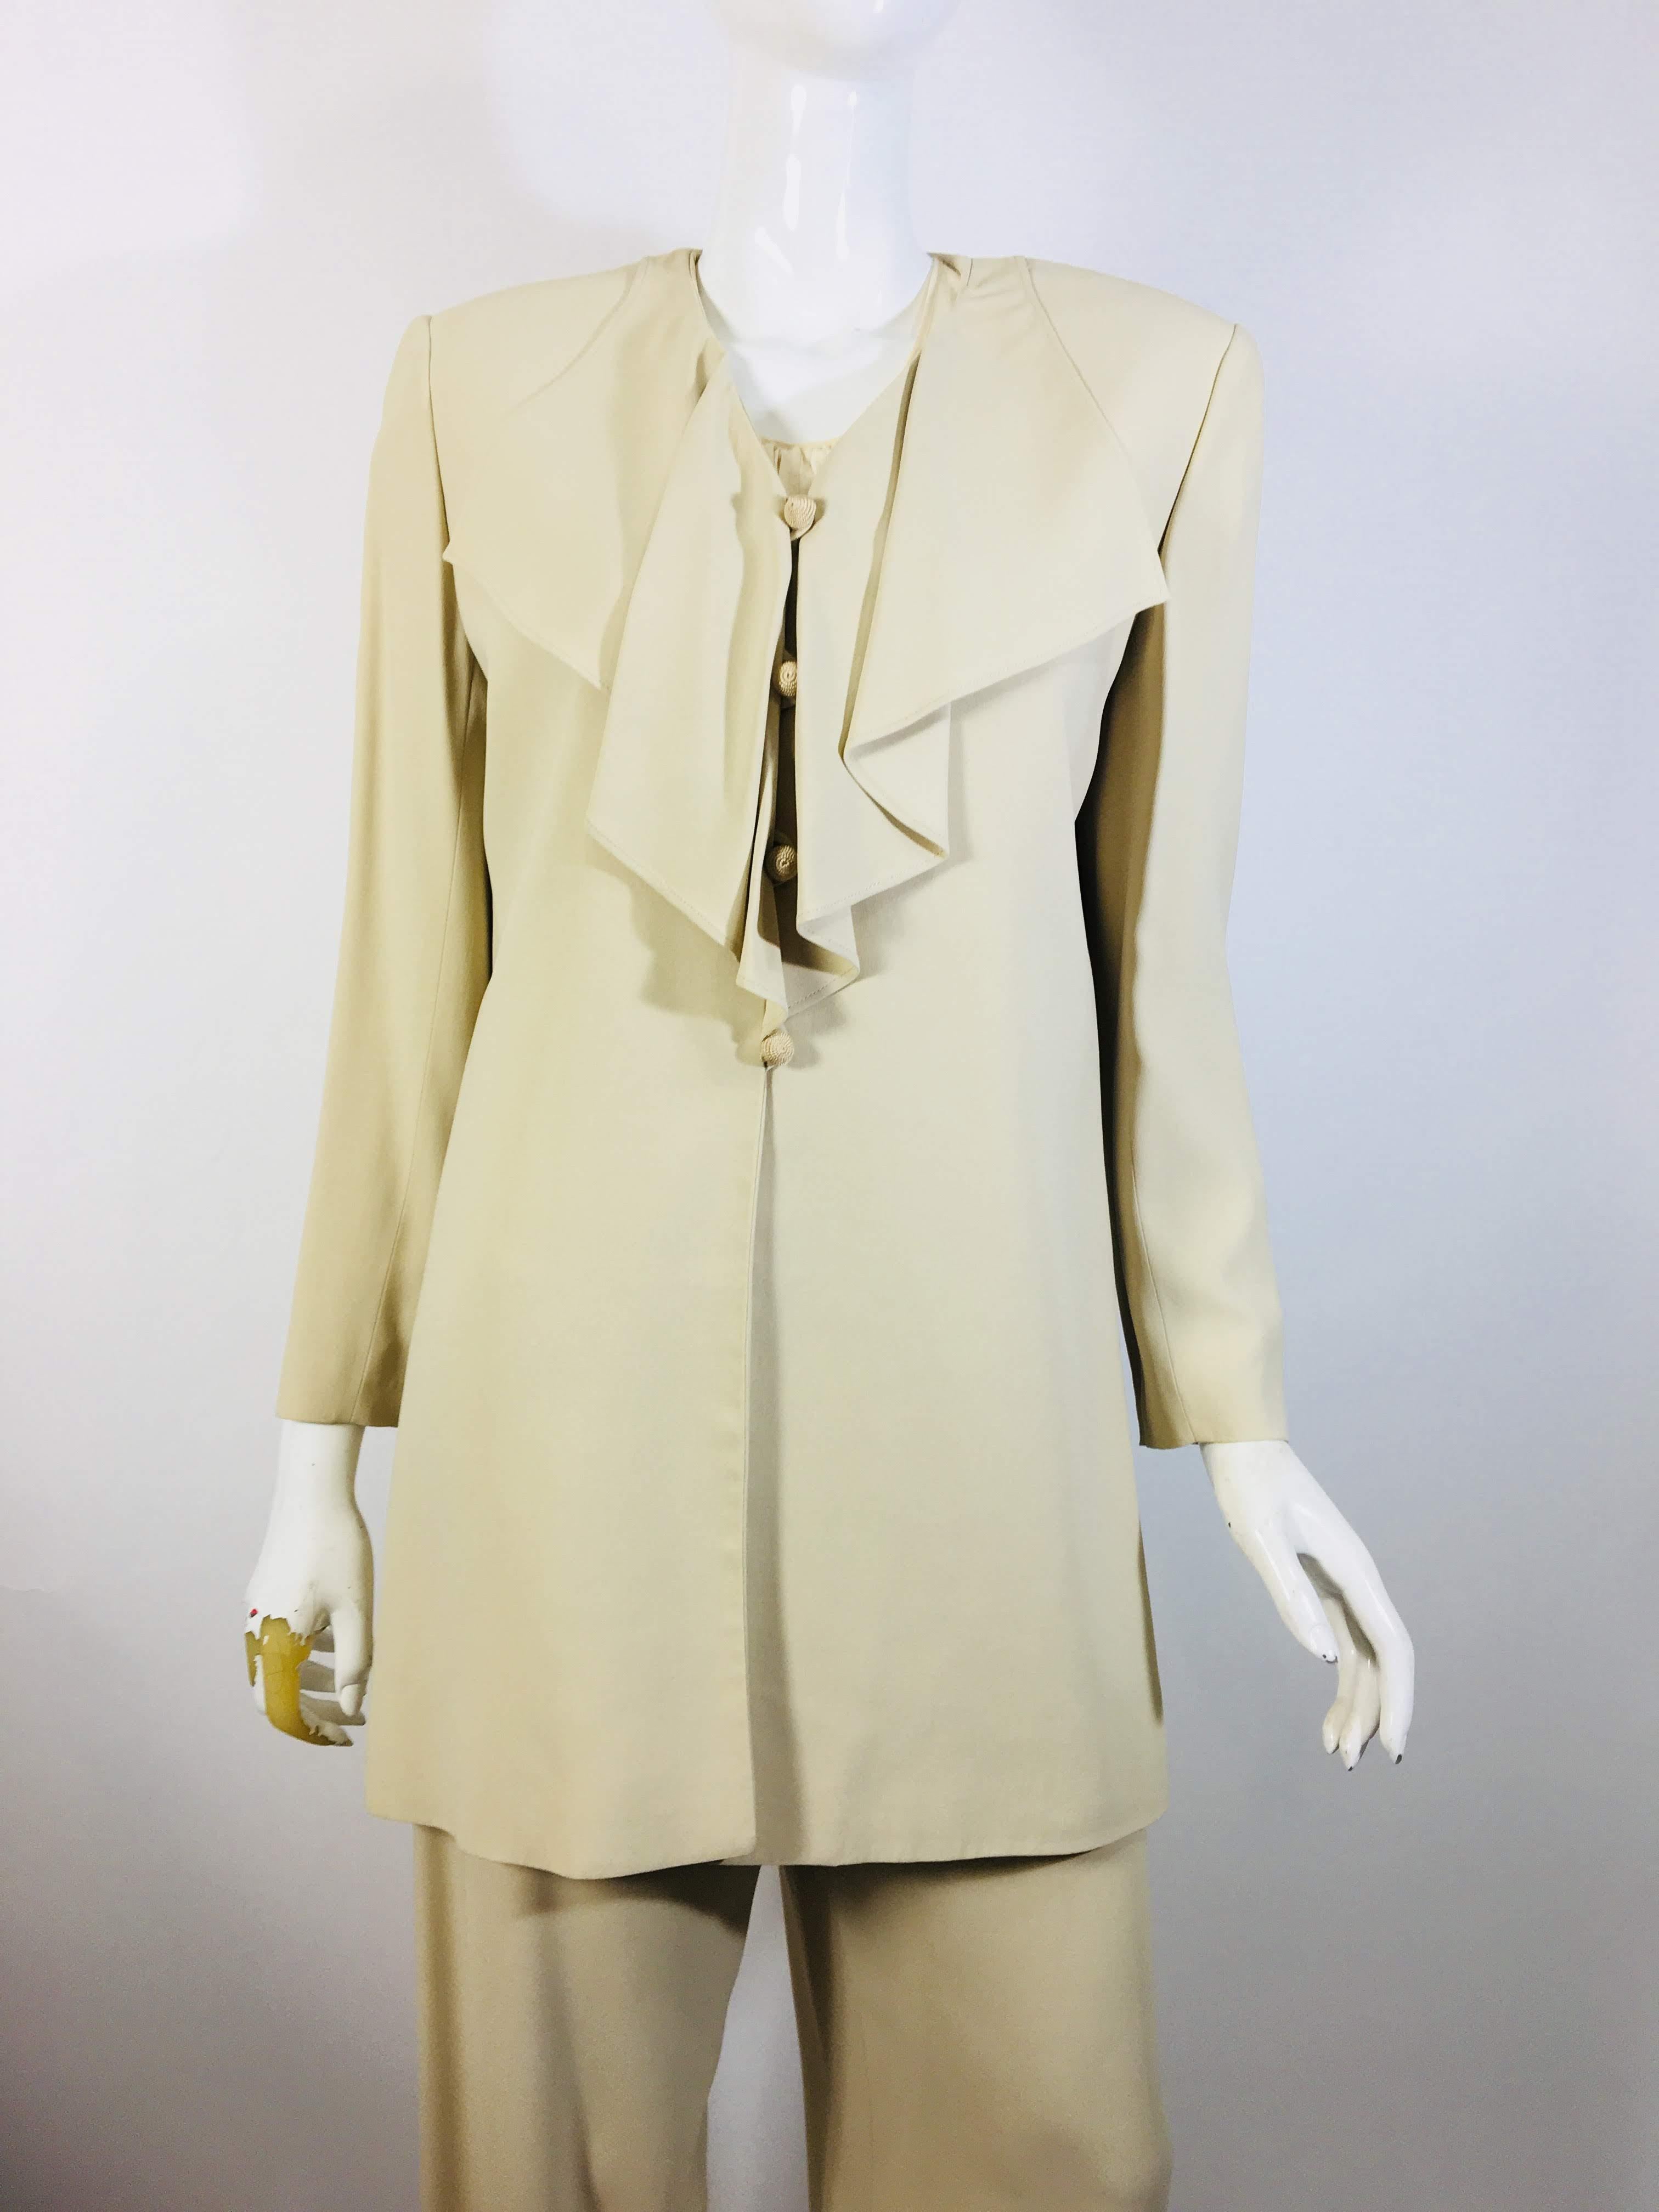 Valentino- Miss V- High Waist Button Front Pant with Draped Neckline and Woven-Button Up Longline Jacket
Tan Acetate/Viscose- 
Made in Italy
Size IT 42/ US 8 